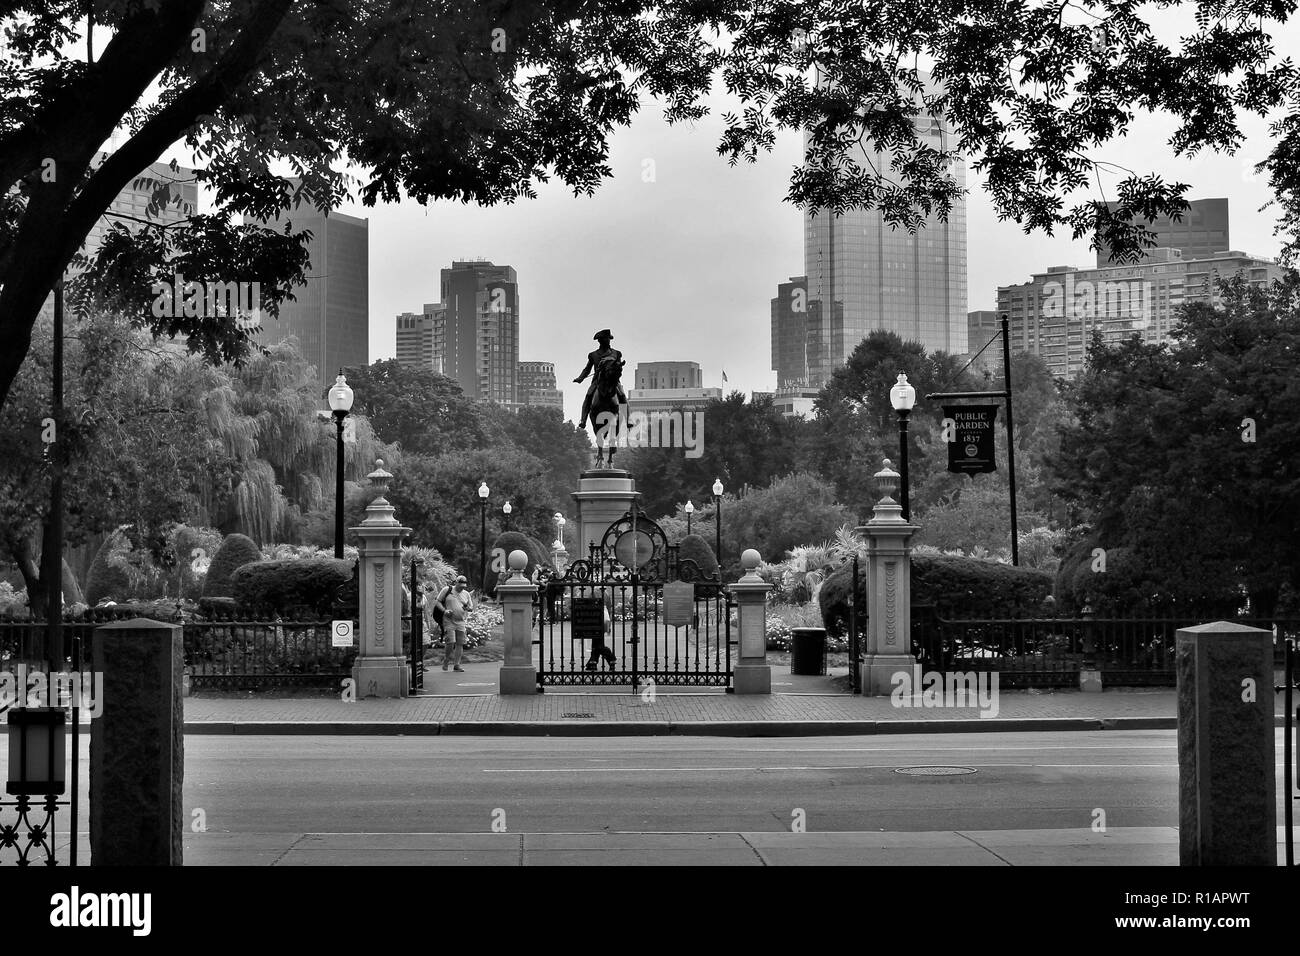 Black and white photo of the Public Garden in Boston, MA with George Washington statue.  Taken from across Arlington street Stock Photo